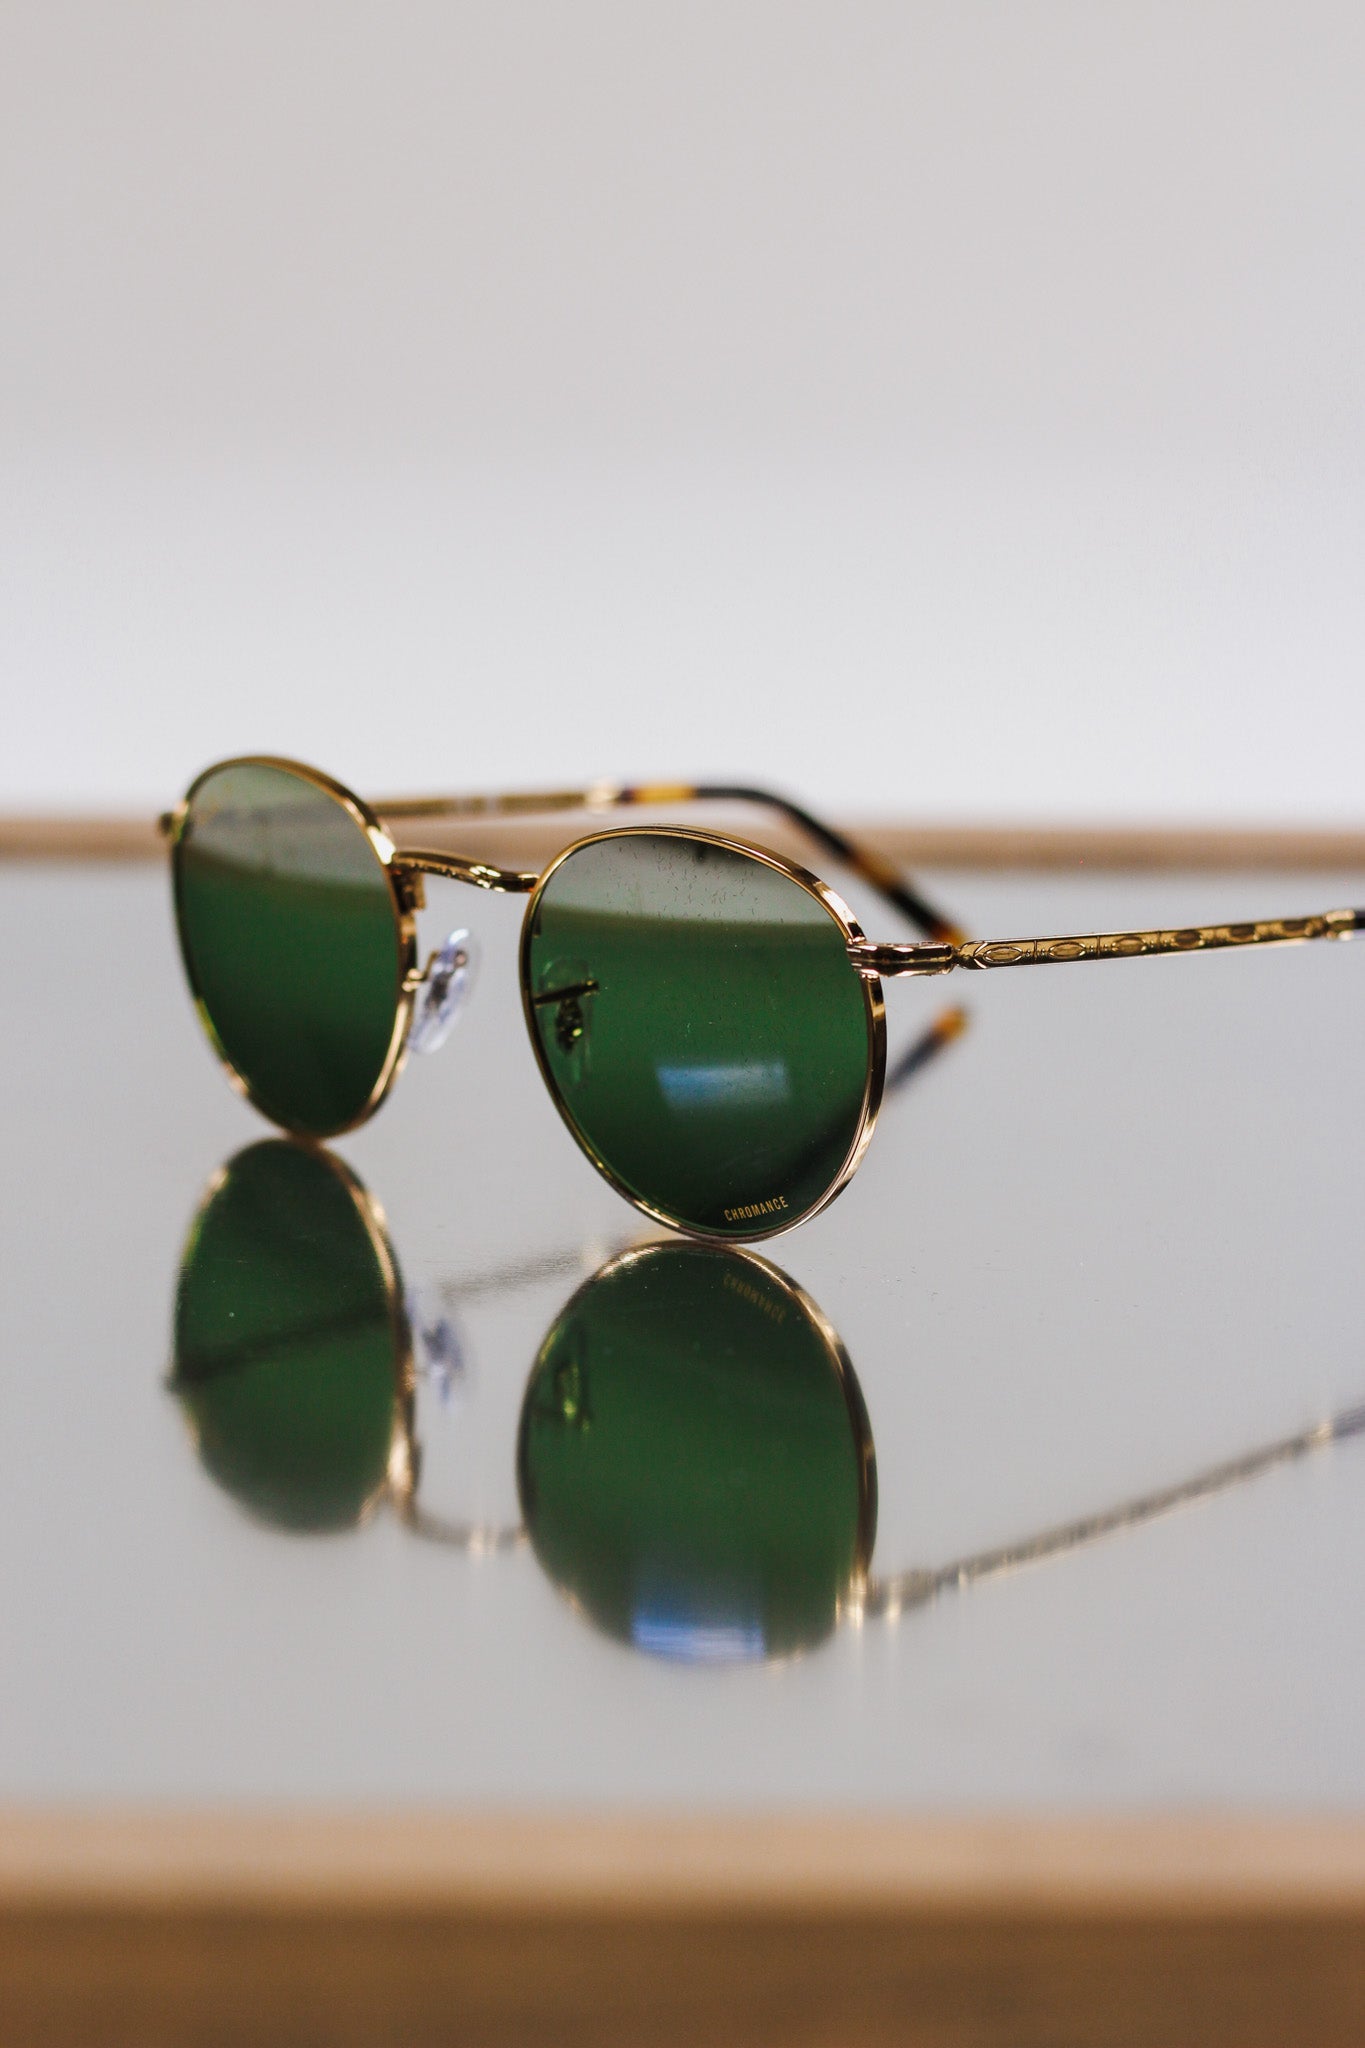 Discover more than 204 round sunglasses green lens best